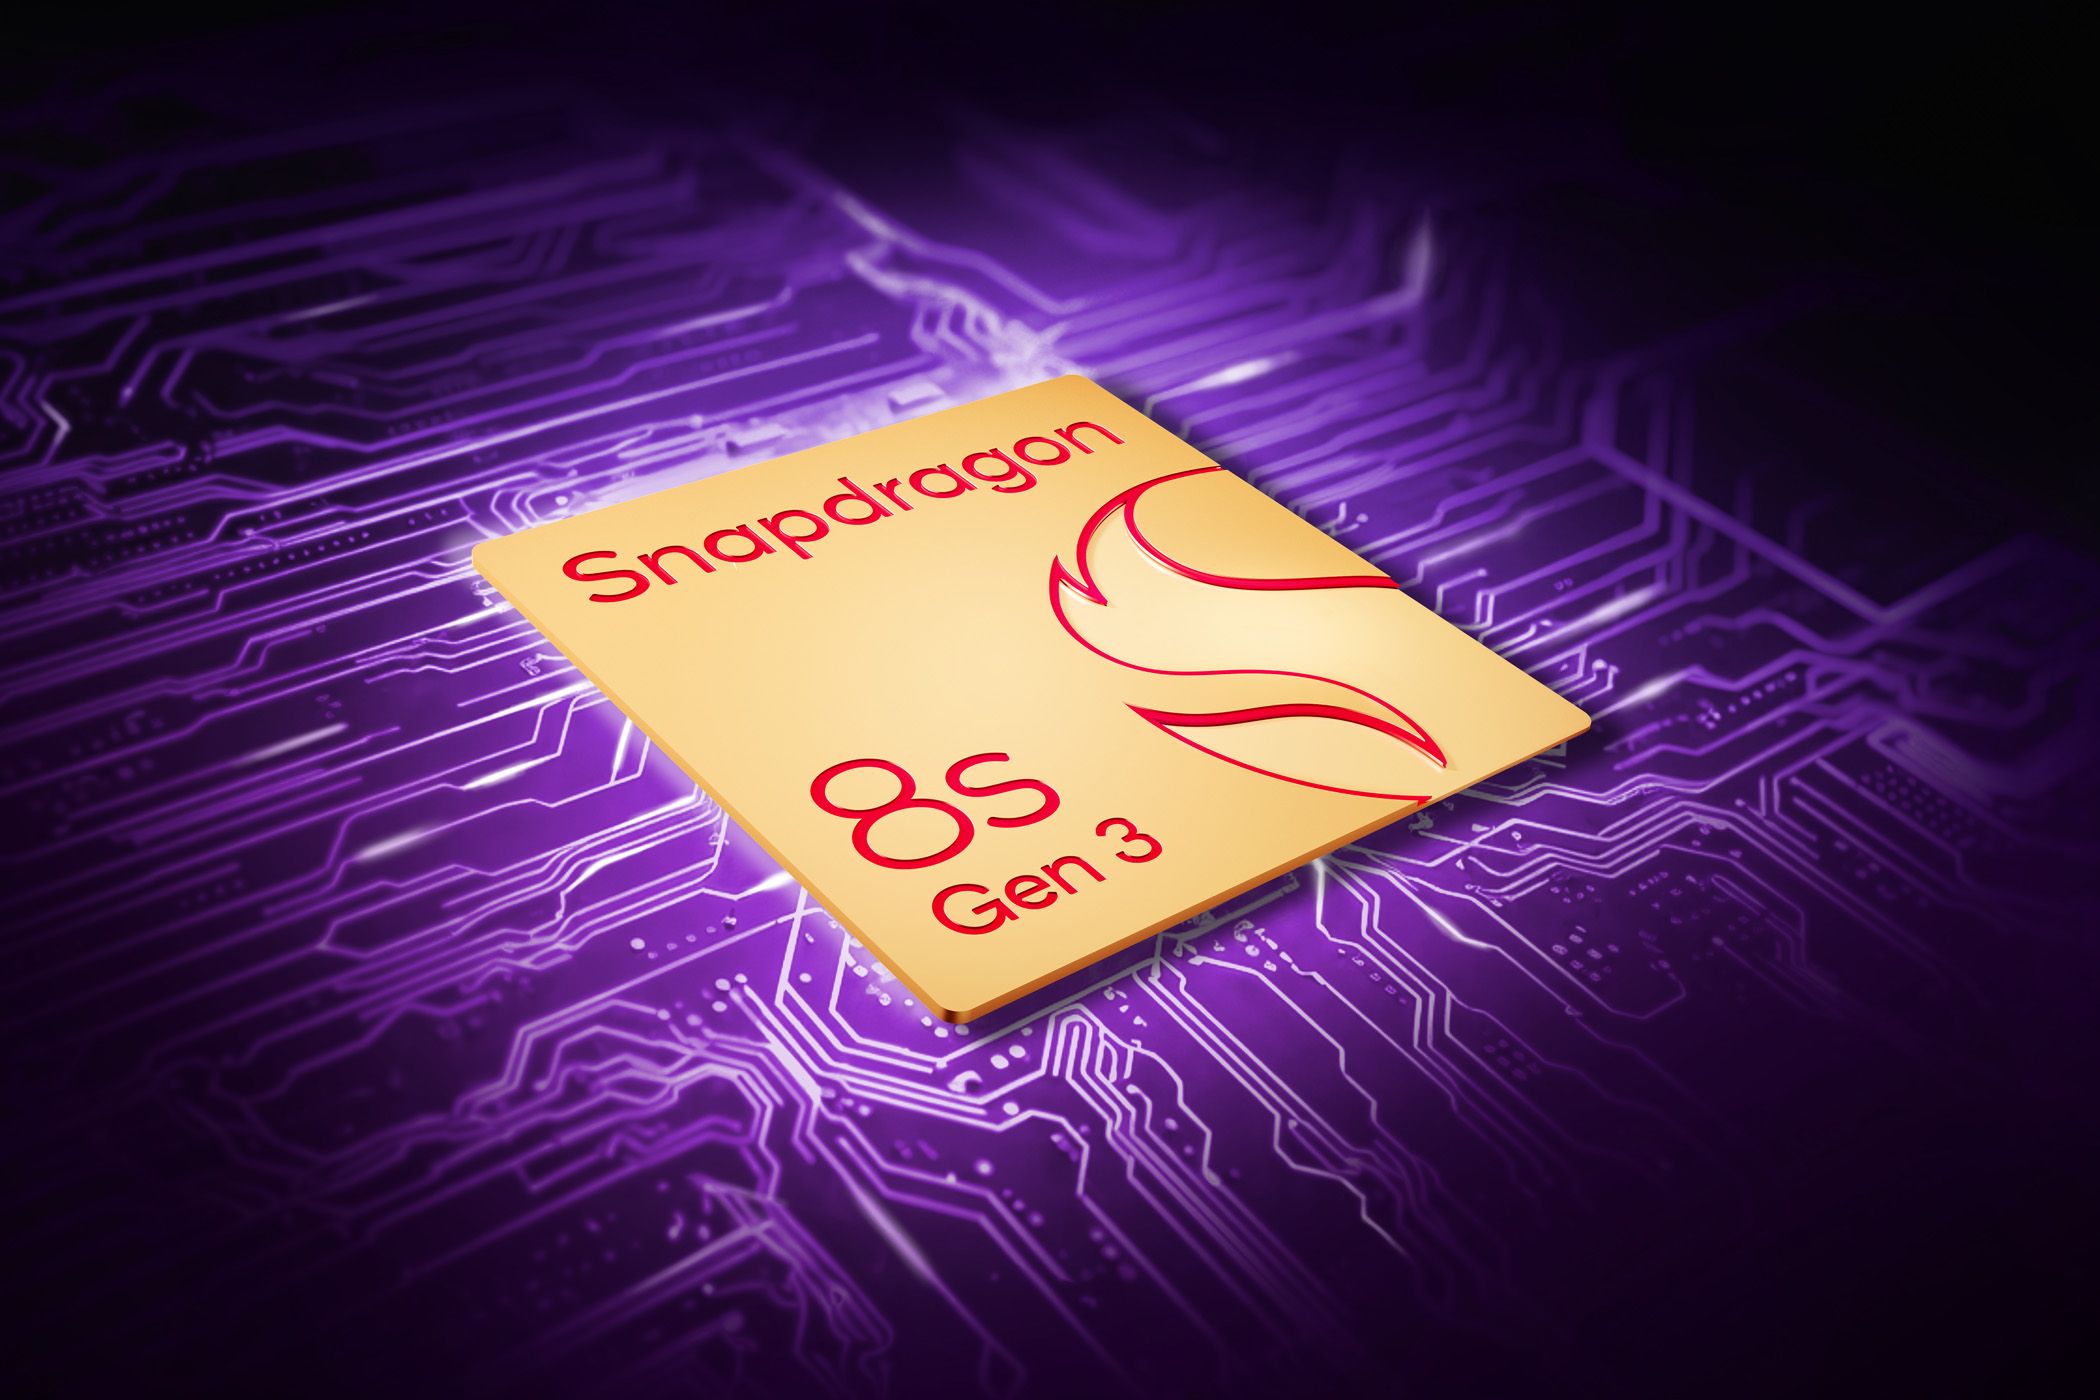 Snapdragon 8S Gen 3 chip on a purple circuit board background.